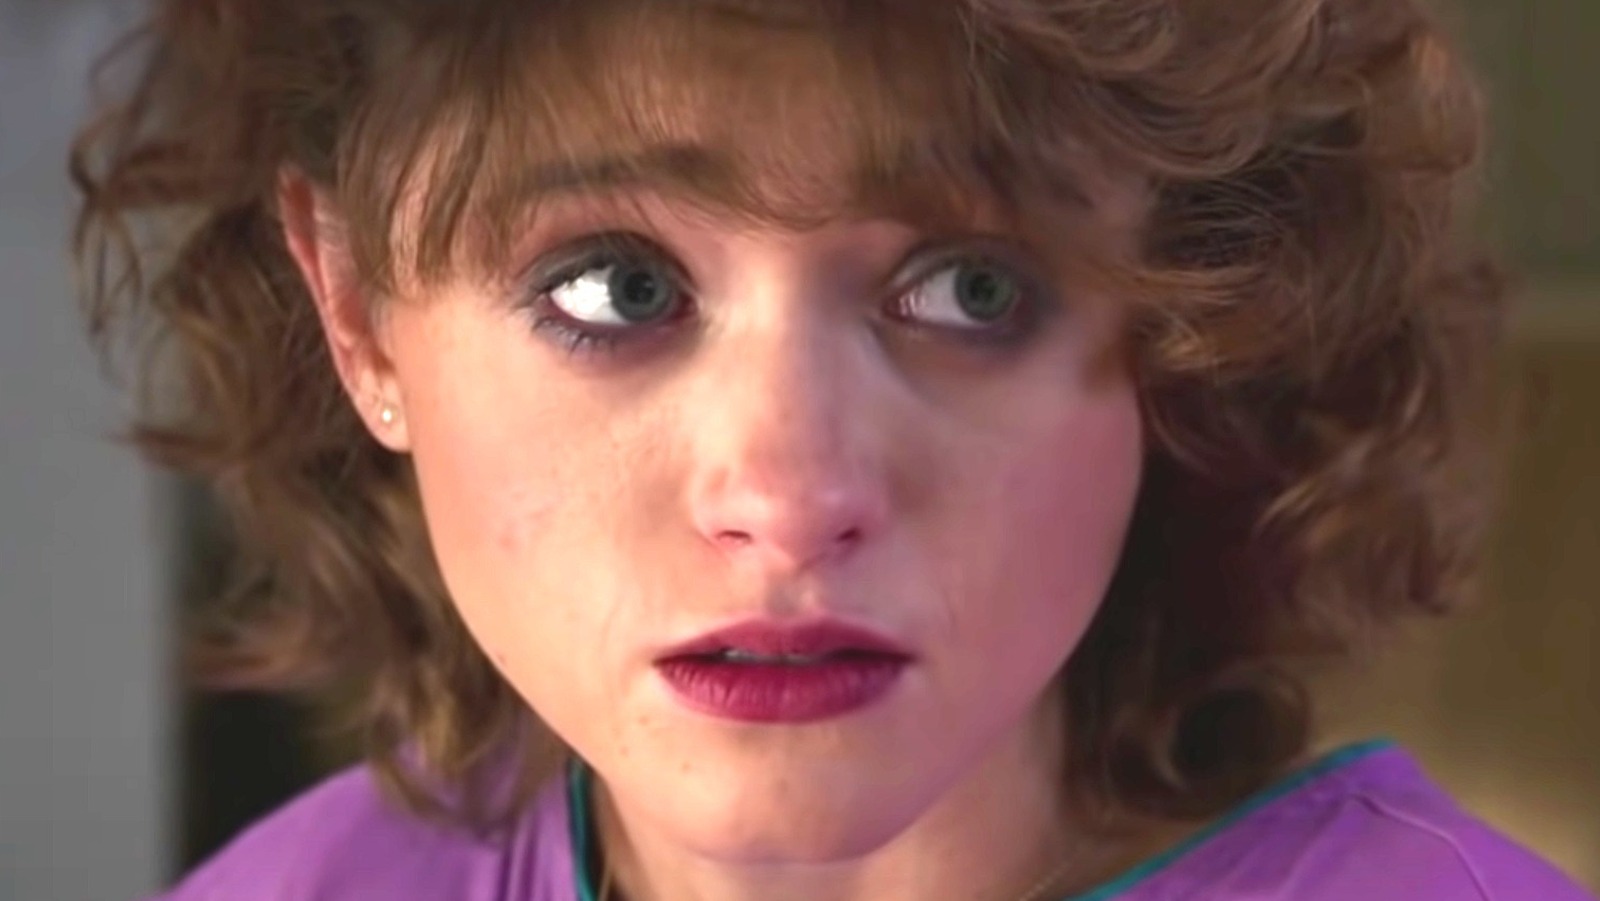 Natalia Dyer Wants Nancy Out of 'Stranger Things' Unscathed